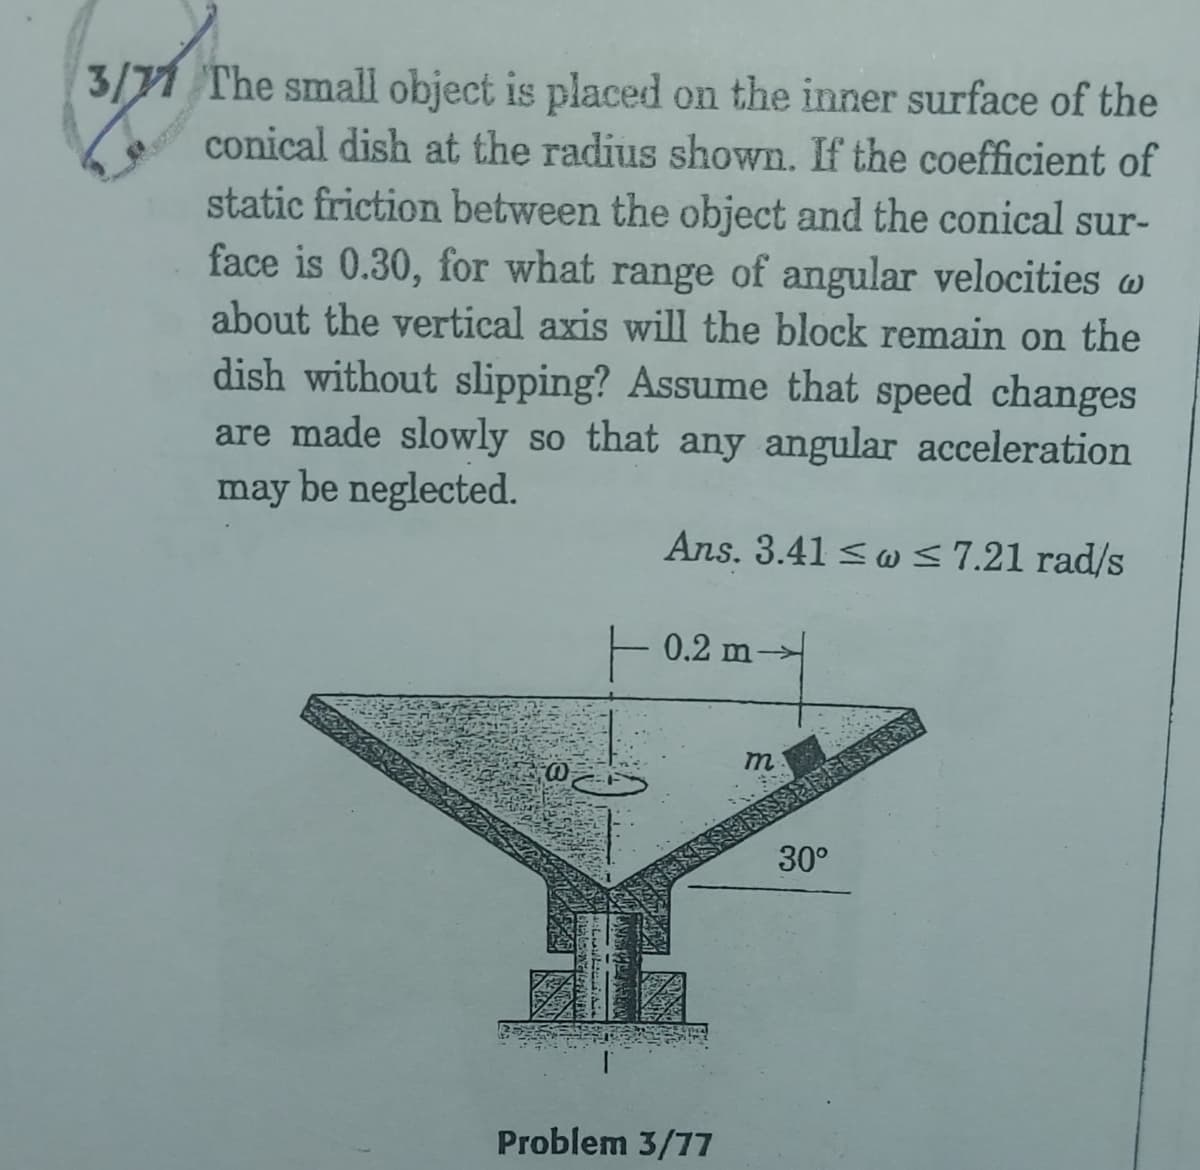 3/71 The small object is placed on the inner surface of the
conical dish at the radius shown. If the coefficient of
static friction between the object and the conical sur-
face is 0.30, for what range of angular velocities w
about the vertical axis will the block remain on the
dish without slipping? Assume that speed changes
are made slowly so that any angular acceleration
may be neglected.
Ans. 3.41 <w<7.21 rad/s
0.2 m-
m
30°
Problem 3/77
